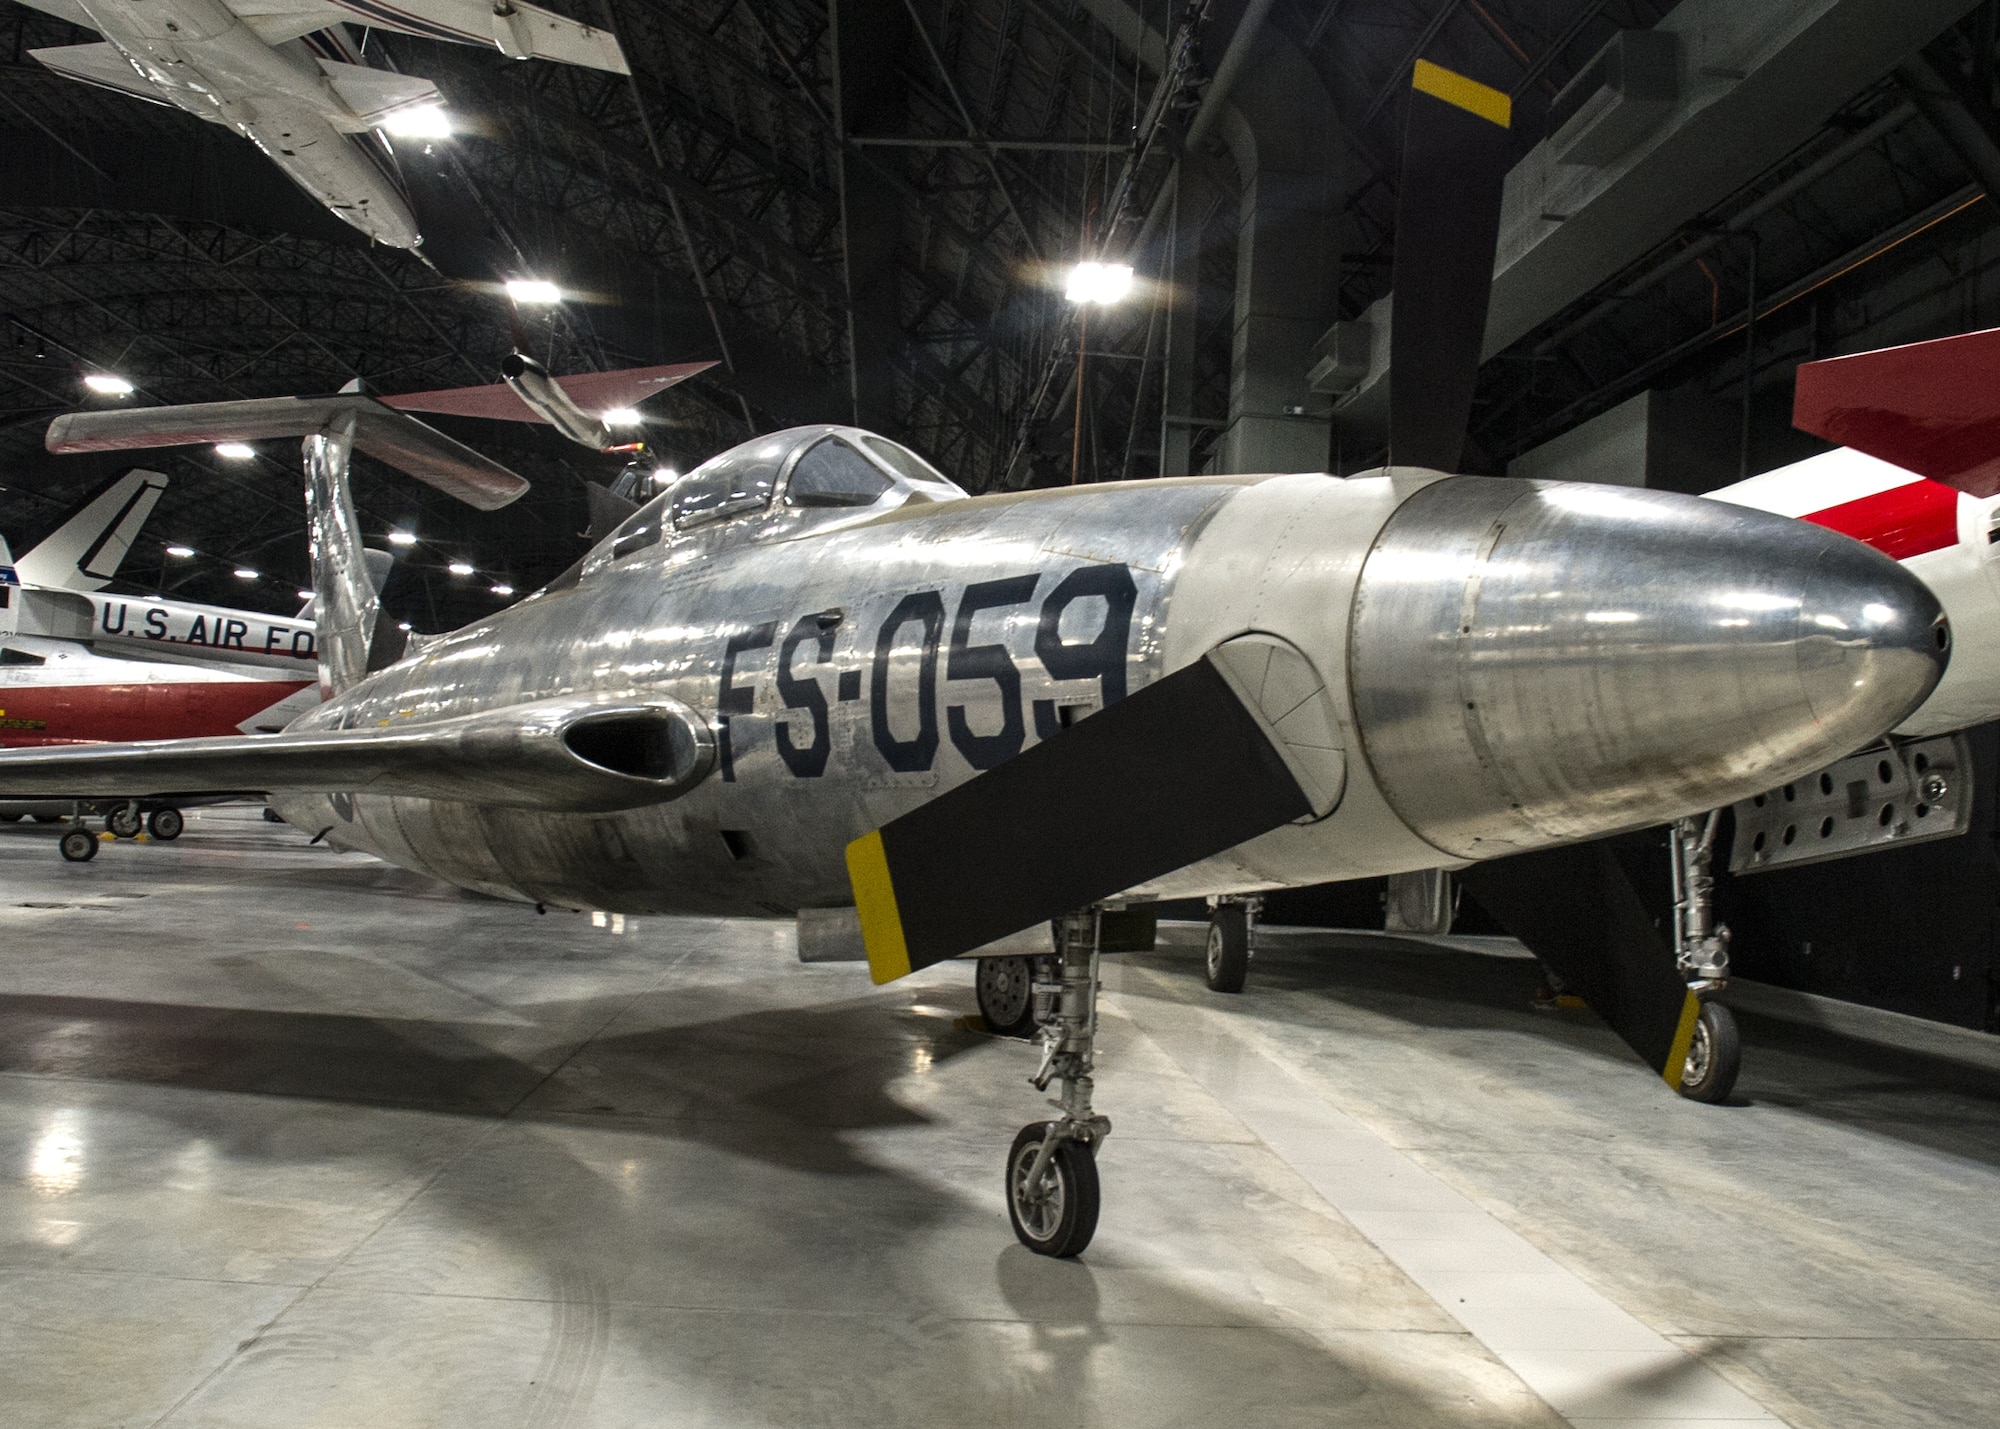 Republic XF-84H in the Research & Development Gallery at the National Museum of the U.S. Air Force on December 28, 2015. (U.S. Air Force photo)